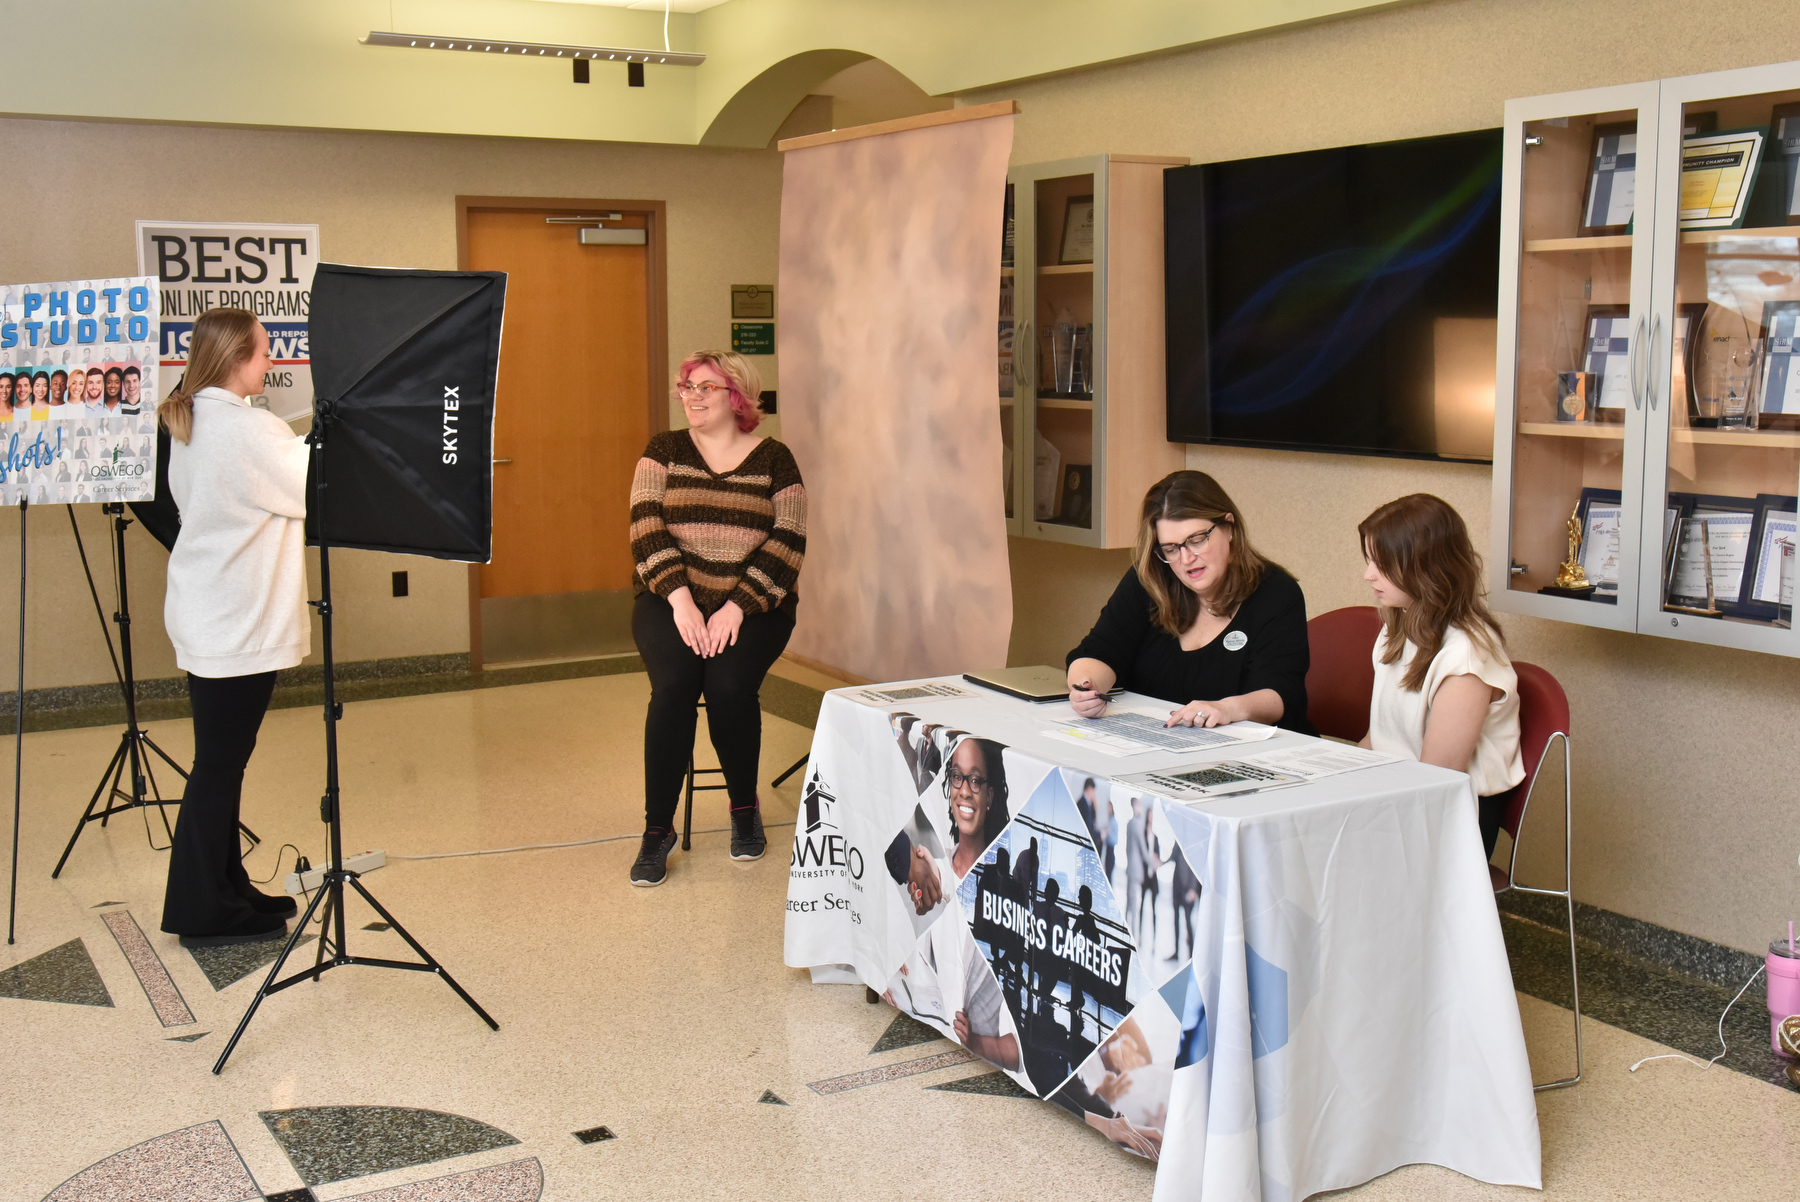 The Mock Interview Palooza hosted by the School of Business, Career Services, and the Alumni Engagement Office on Feb. 12 and 13 in Rich Hall provided approximately 20-minute interviews conducted by employers from a multitude of fields. 